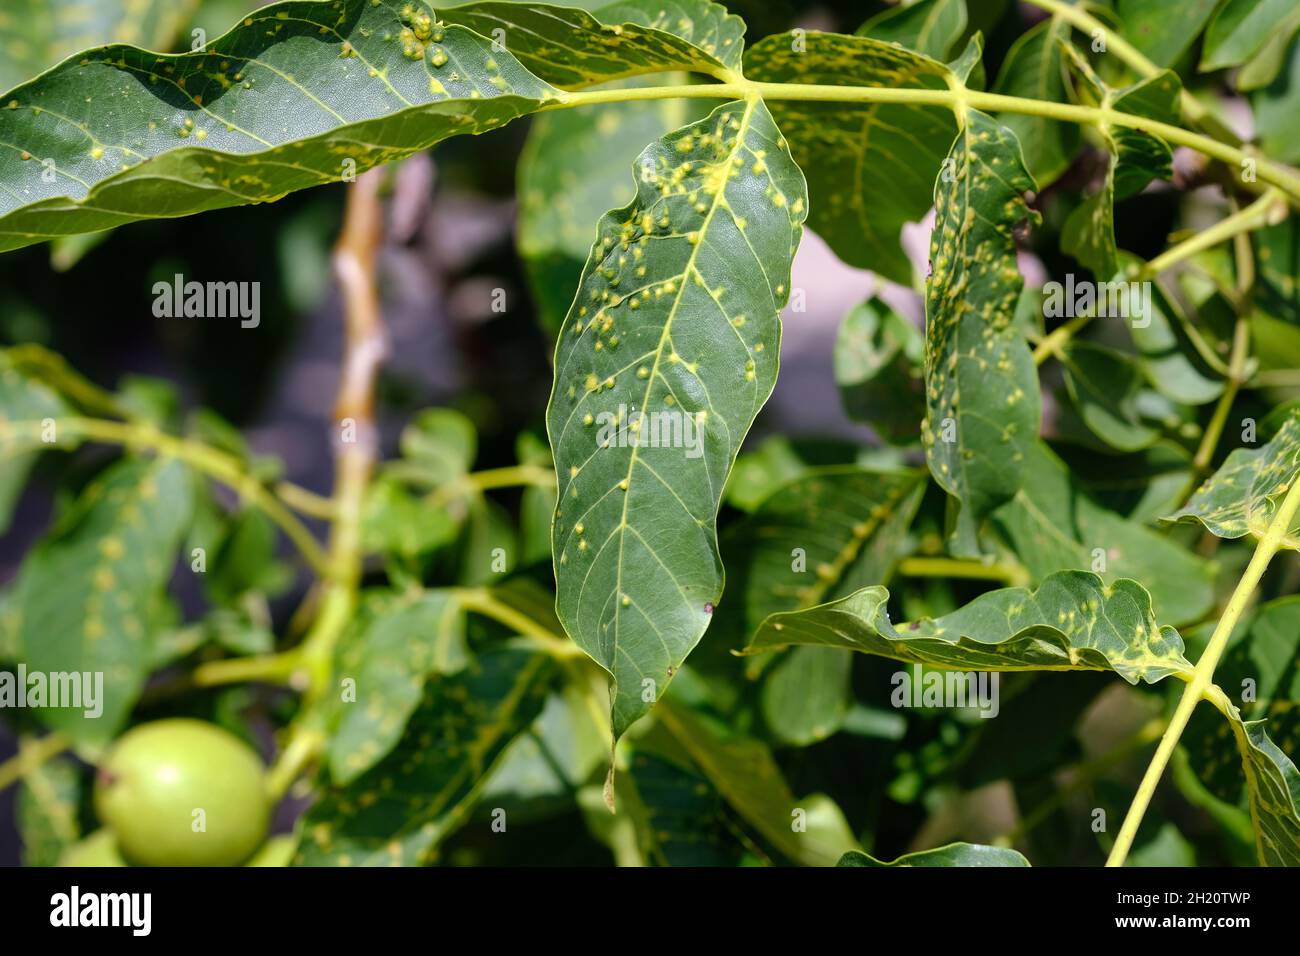 Walnut leaves are covered with yellow dots. Disease pest on walnut leaves. Leaves on the tree close-up. Eriophyes tristriatus Nal or Nutty gall mite. Stock Photo